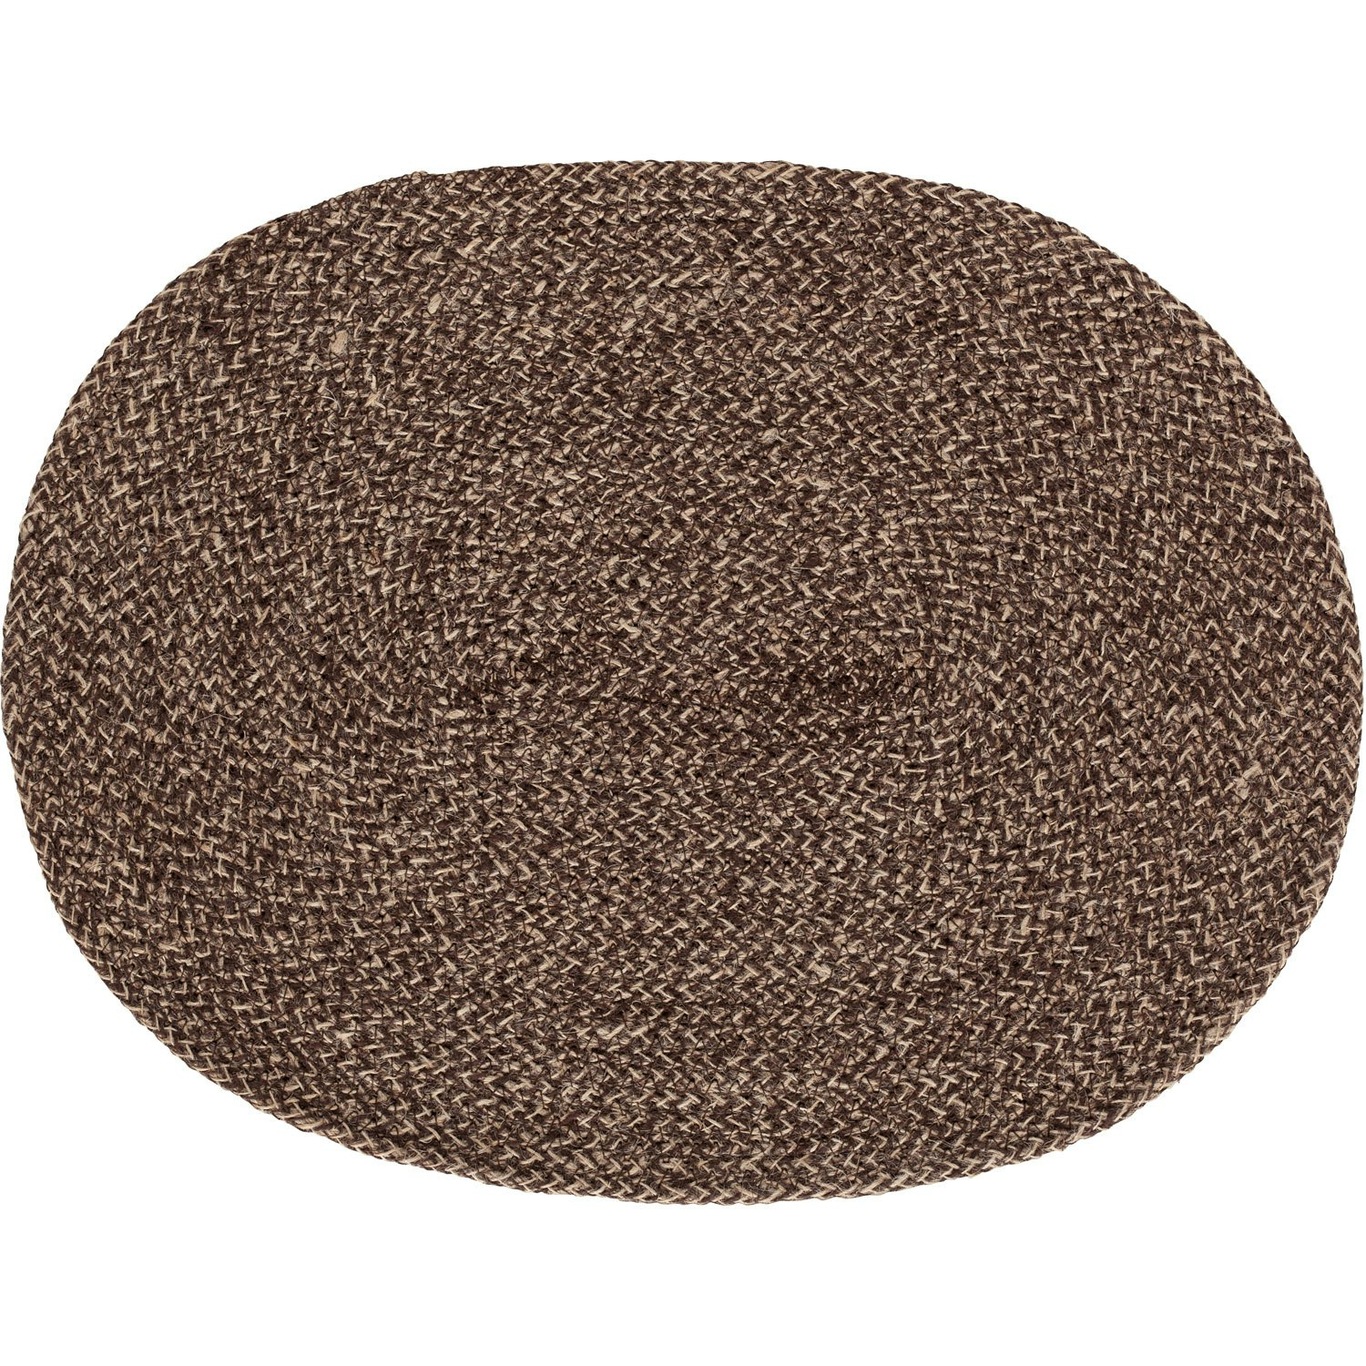 Ella Placemat Oval, Brown/Natural